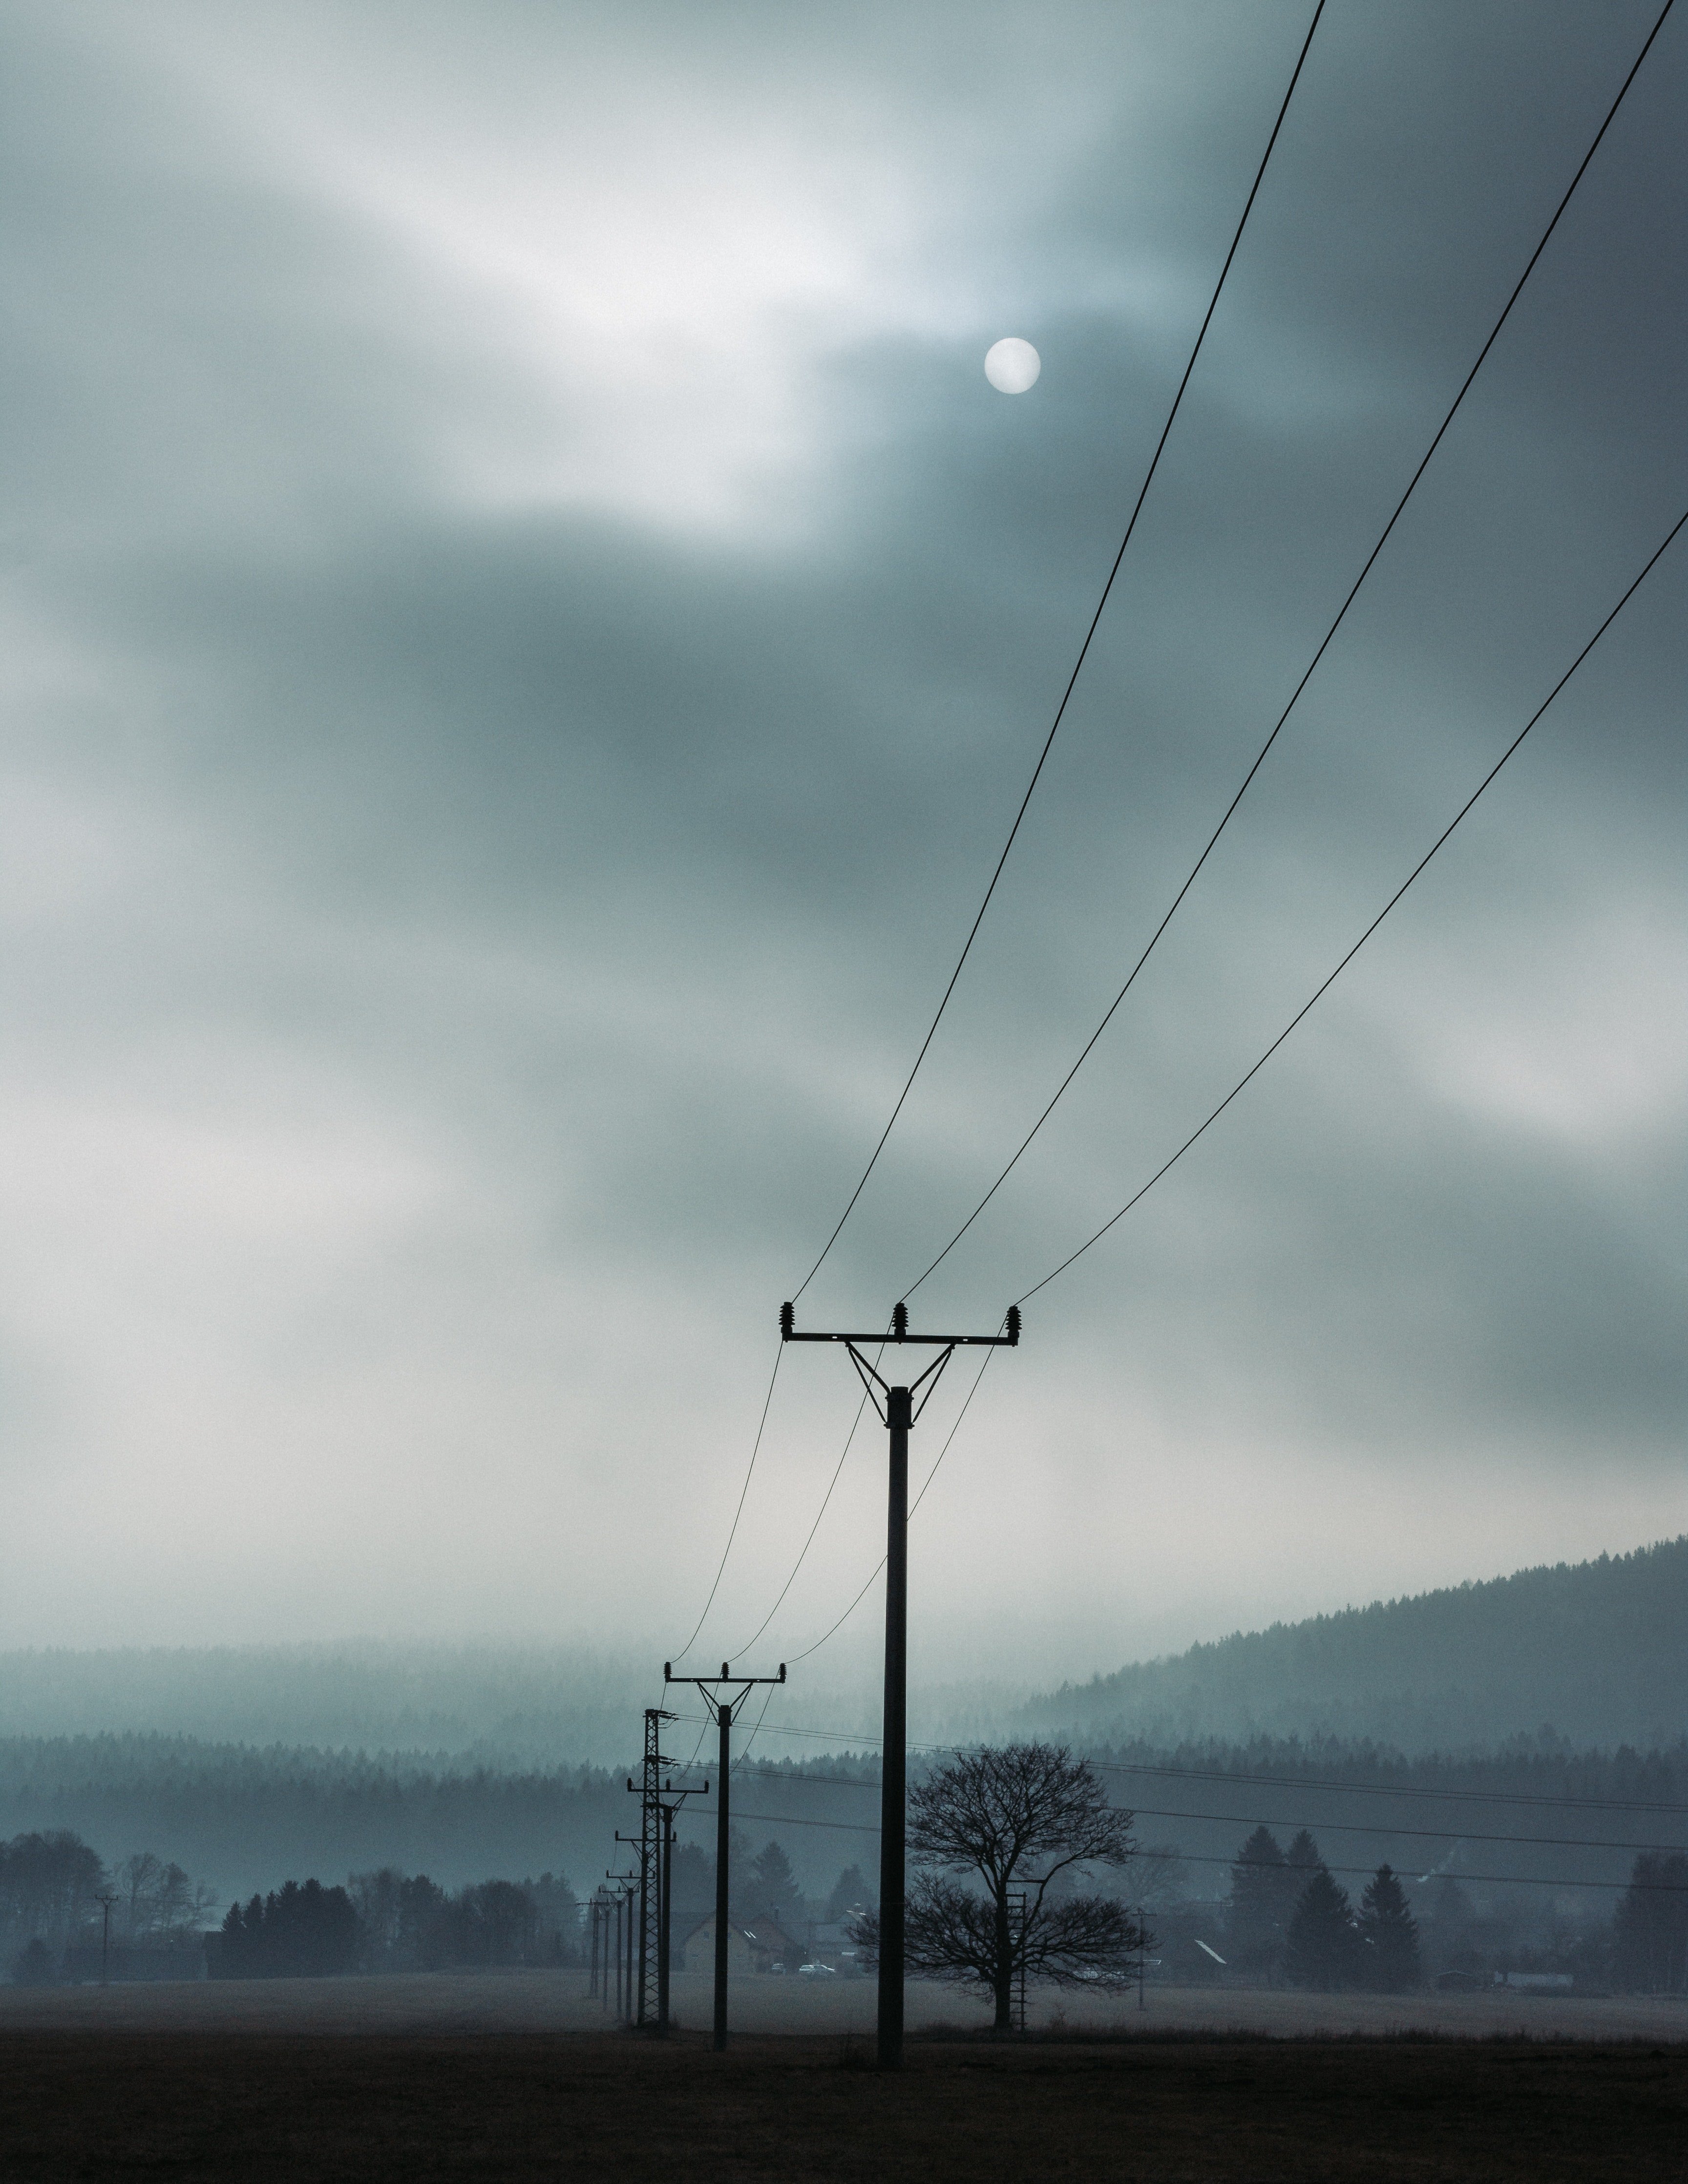 Landscape picture of electric posts on a cloudy day. | Source: Pexels.